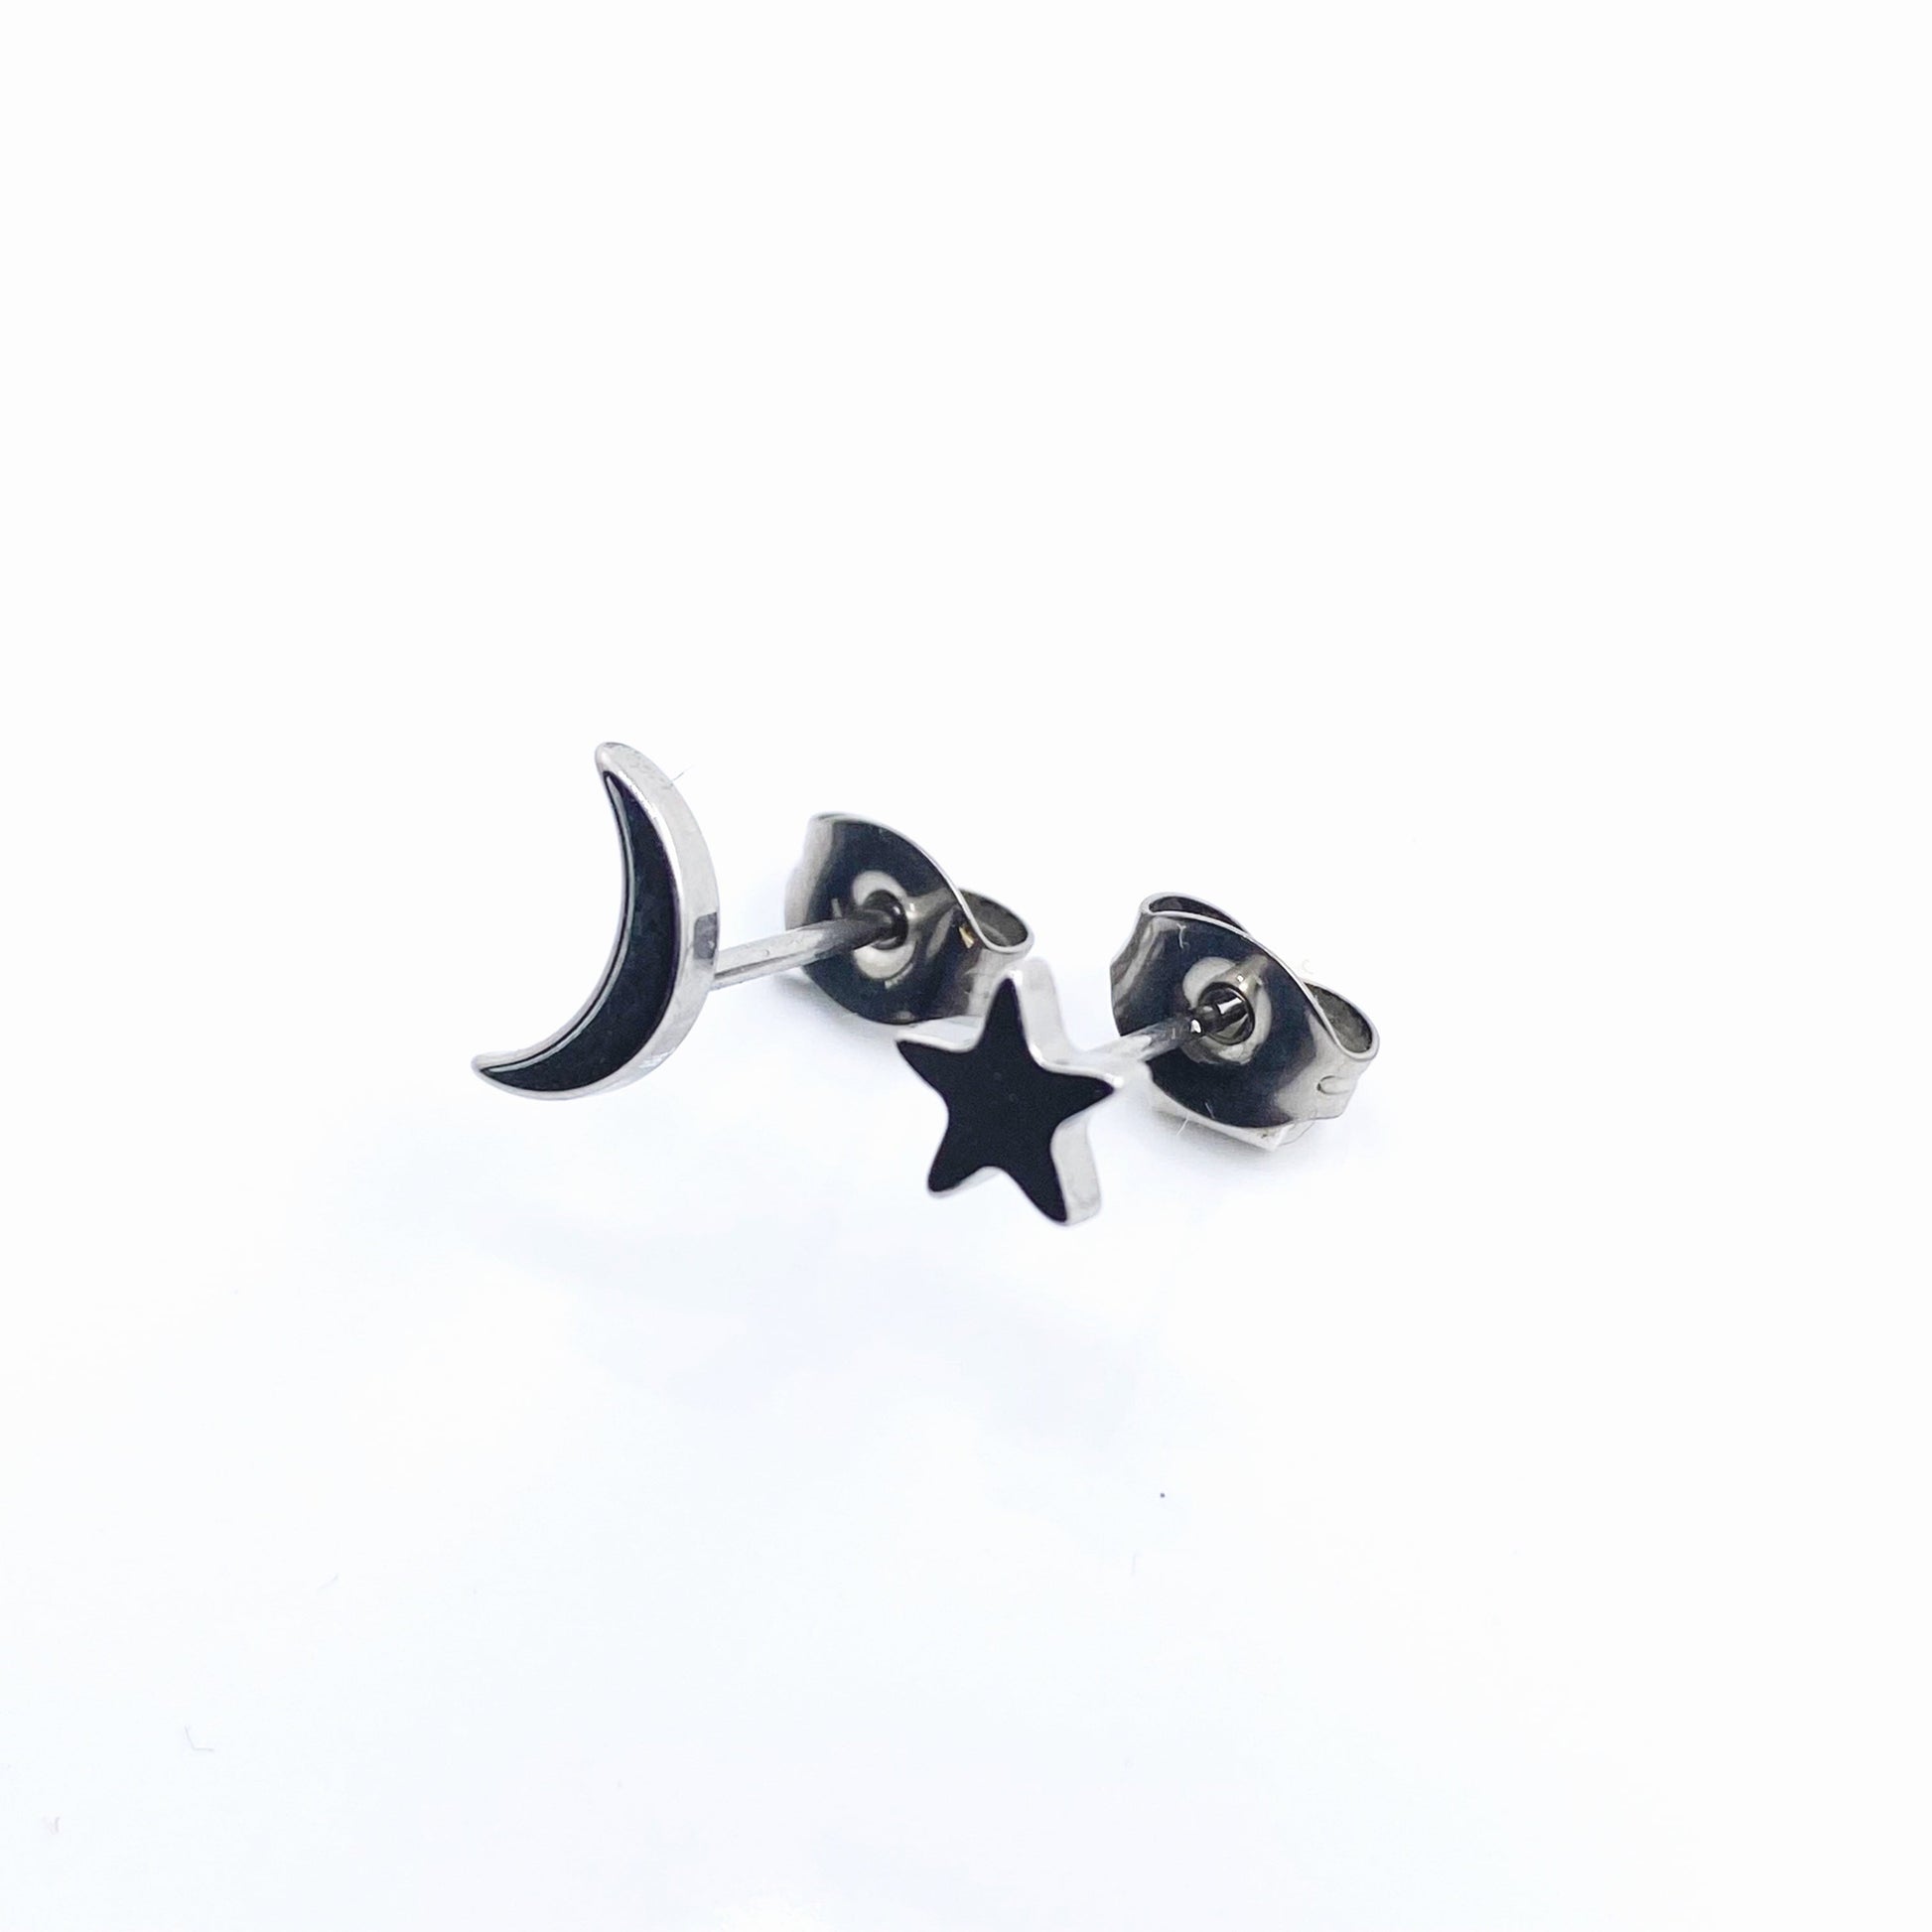 Moon & Star Studs. Titanium Studs with titanium backs. These studs shown on a white background